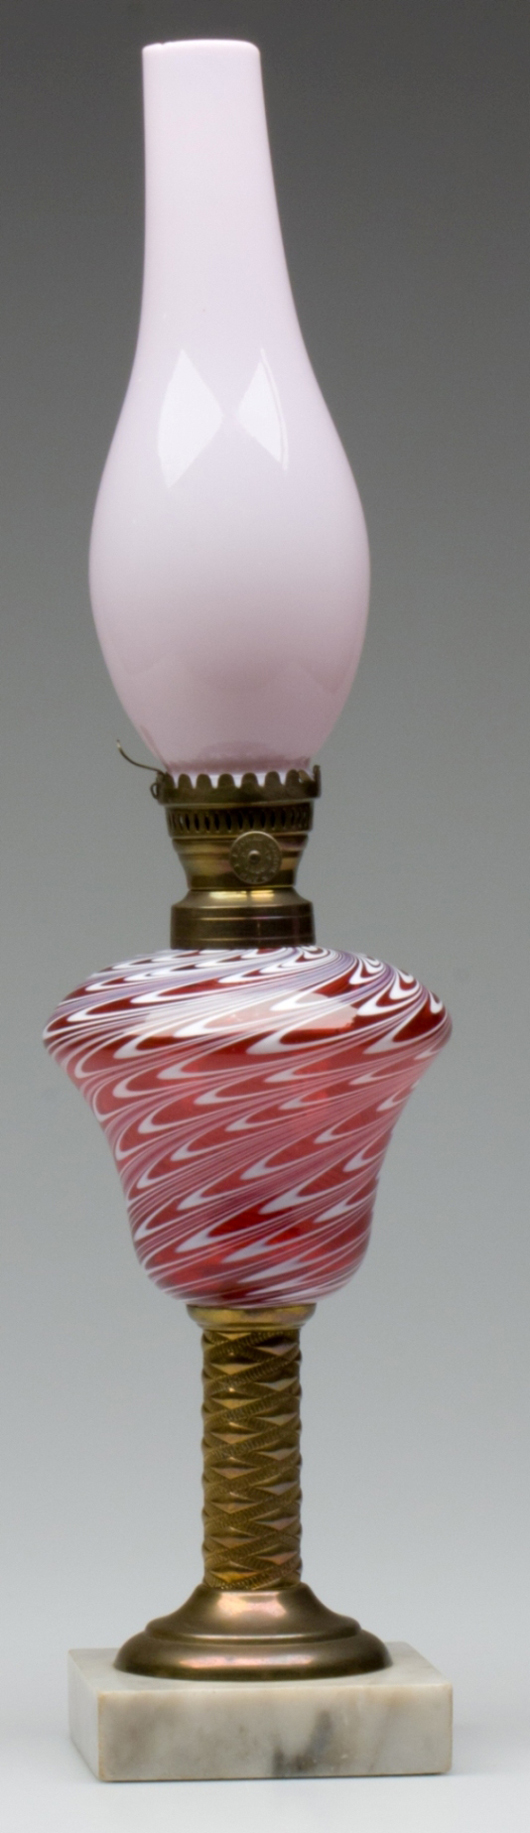 Swirled marbrie loop stand lamp, ruby with opal pulled and swirling loops, marble base (April 28 sale, $2,760, Lot 1). Image courtesy Jeffrey S. Evans & Associates.